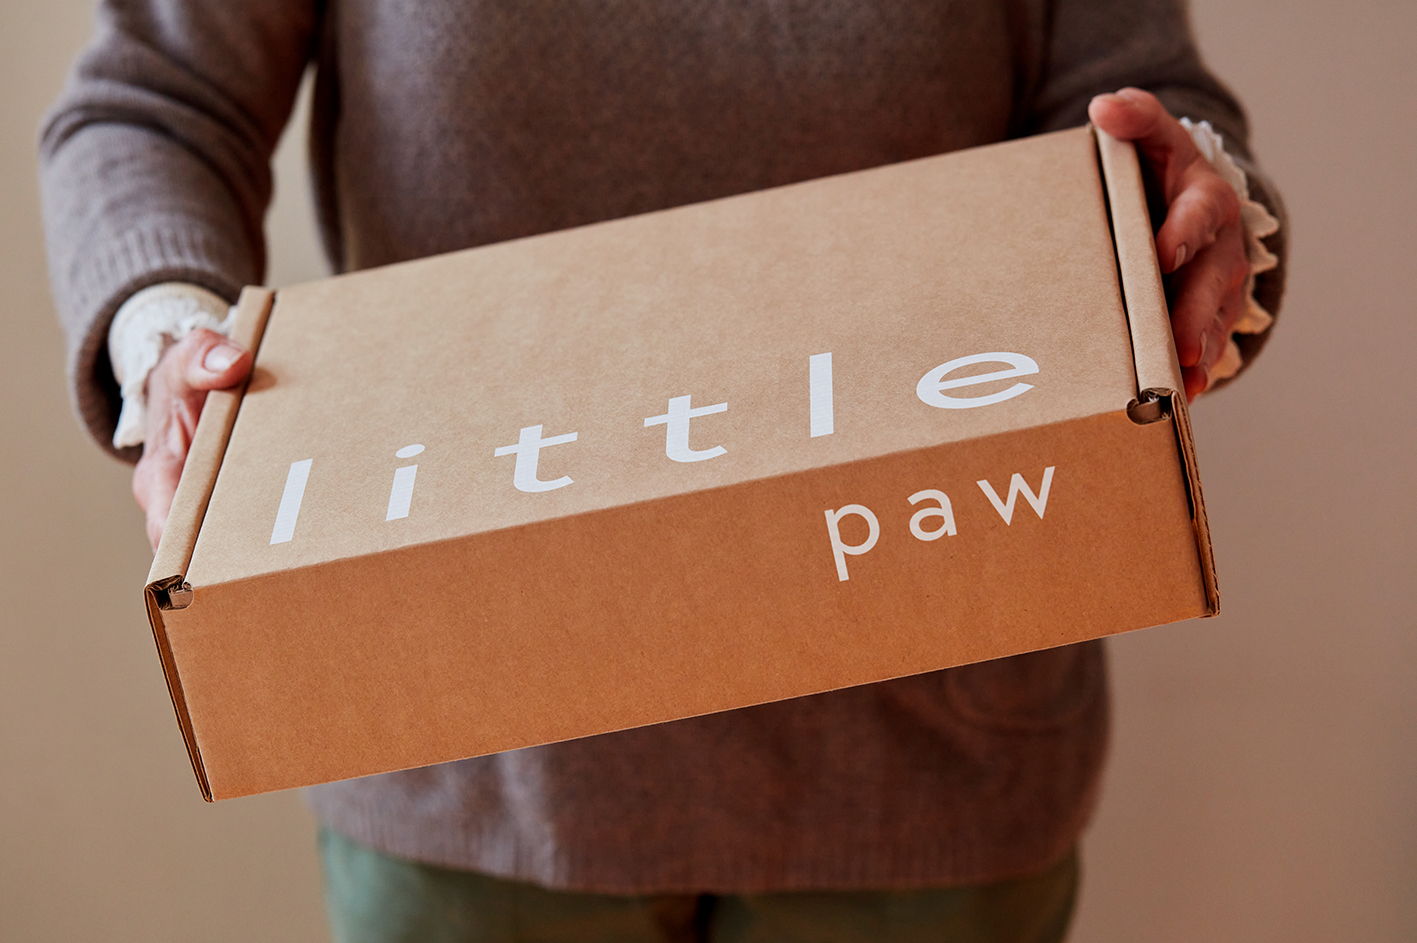 Almighty Creative Studio Create Branding and Packaging Design for Little Paw